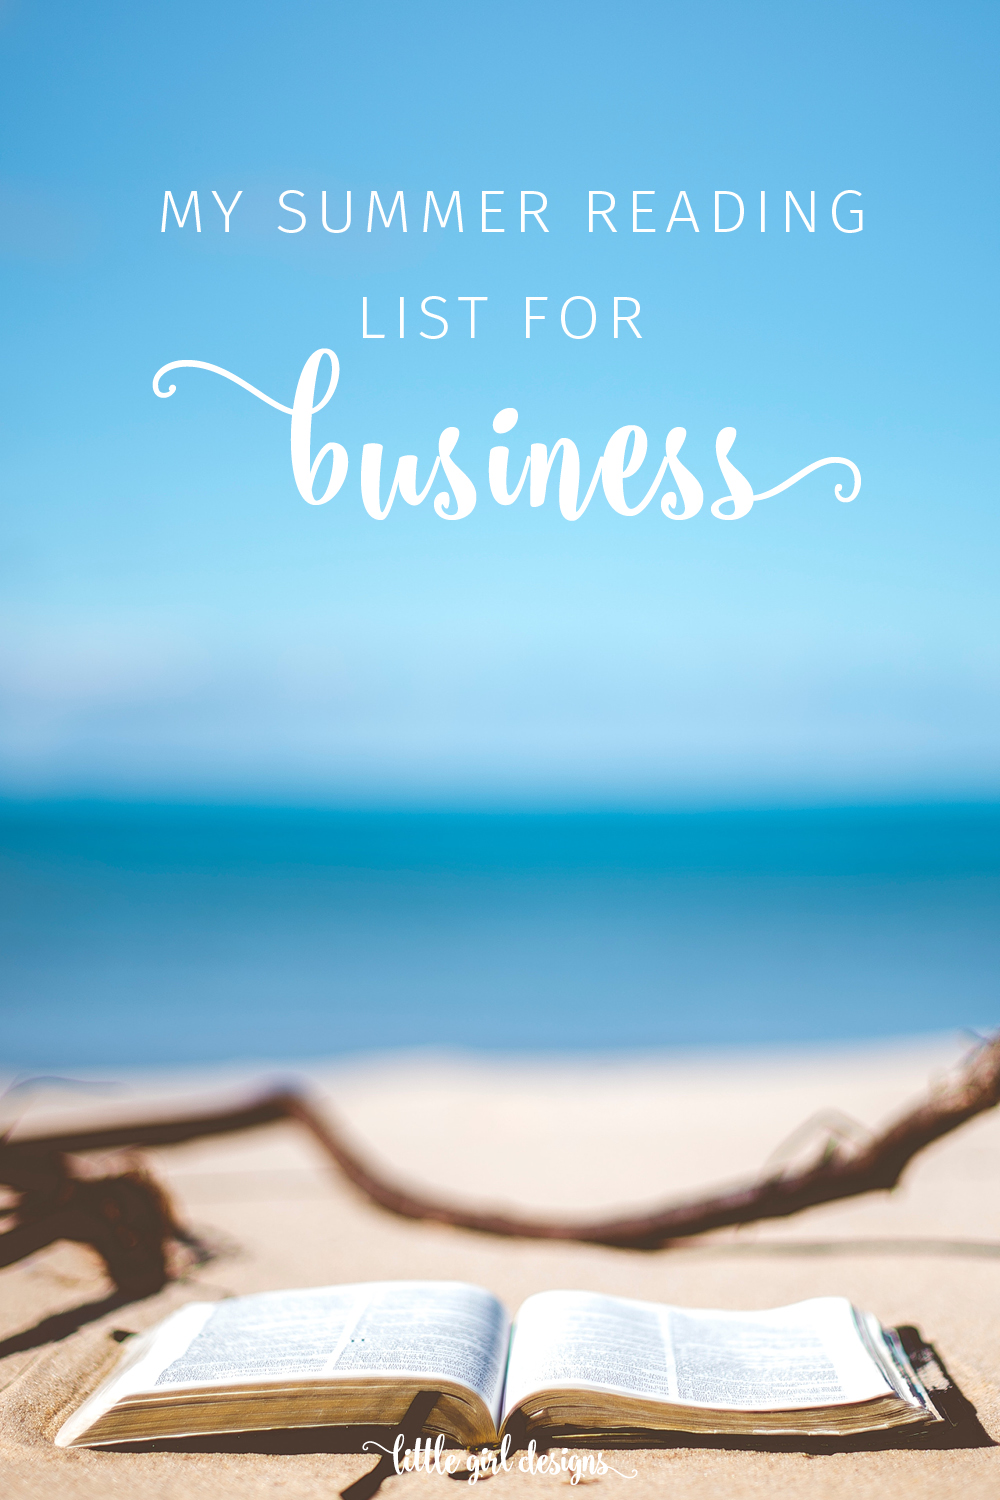 What a great list of books for your business! I need to read these as I want to grow my blog and online business this year. I especially appreciate that this summer reading list is not niche-specific and is more leadership and wealth-building based. Great resource!